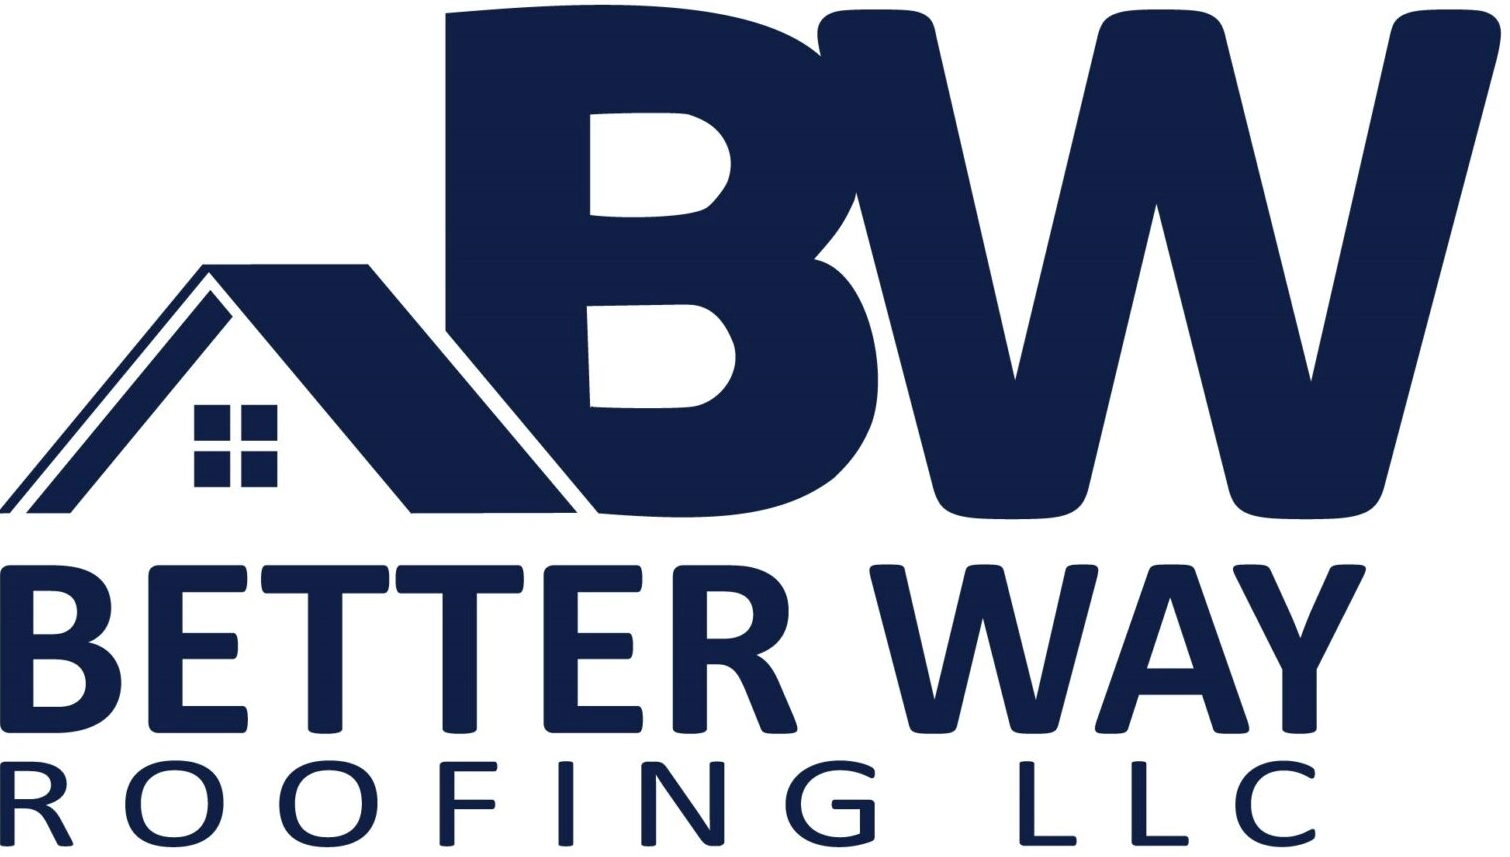 Better Way Roofing Logo